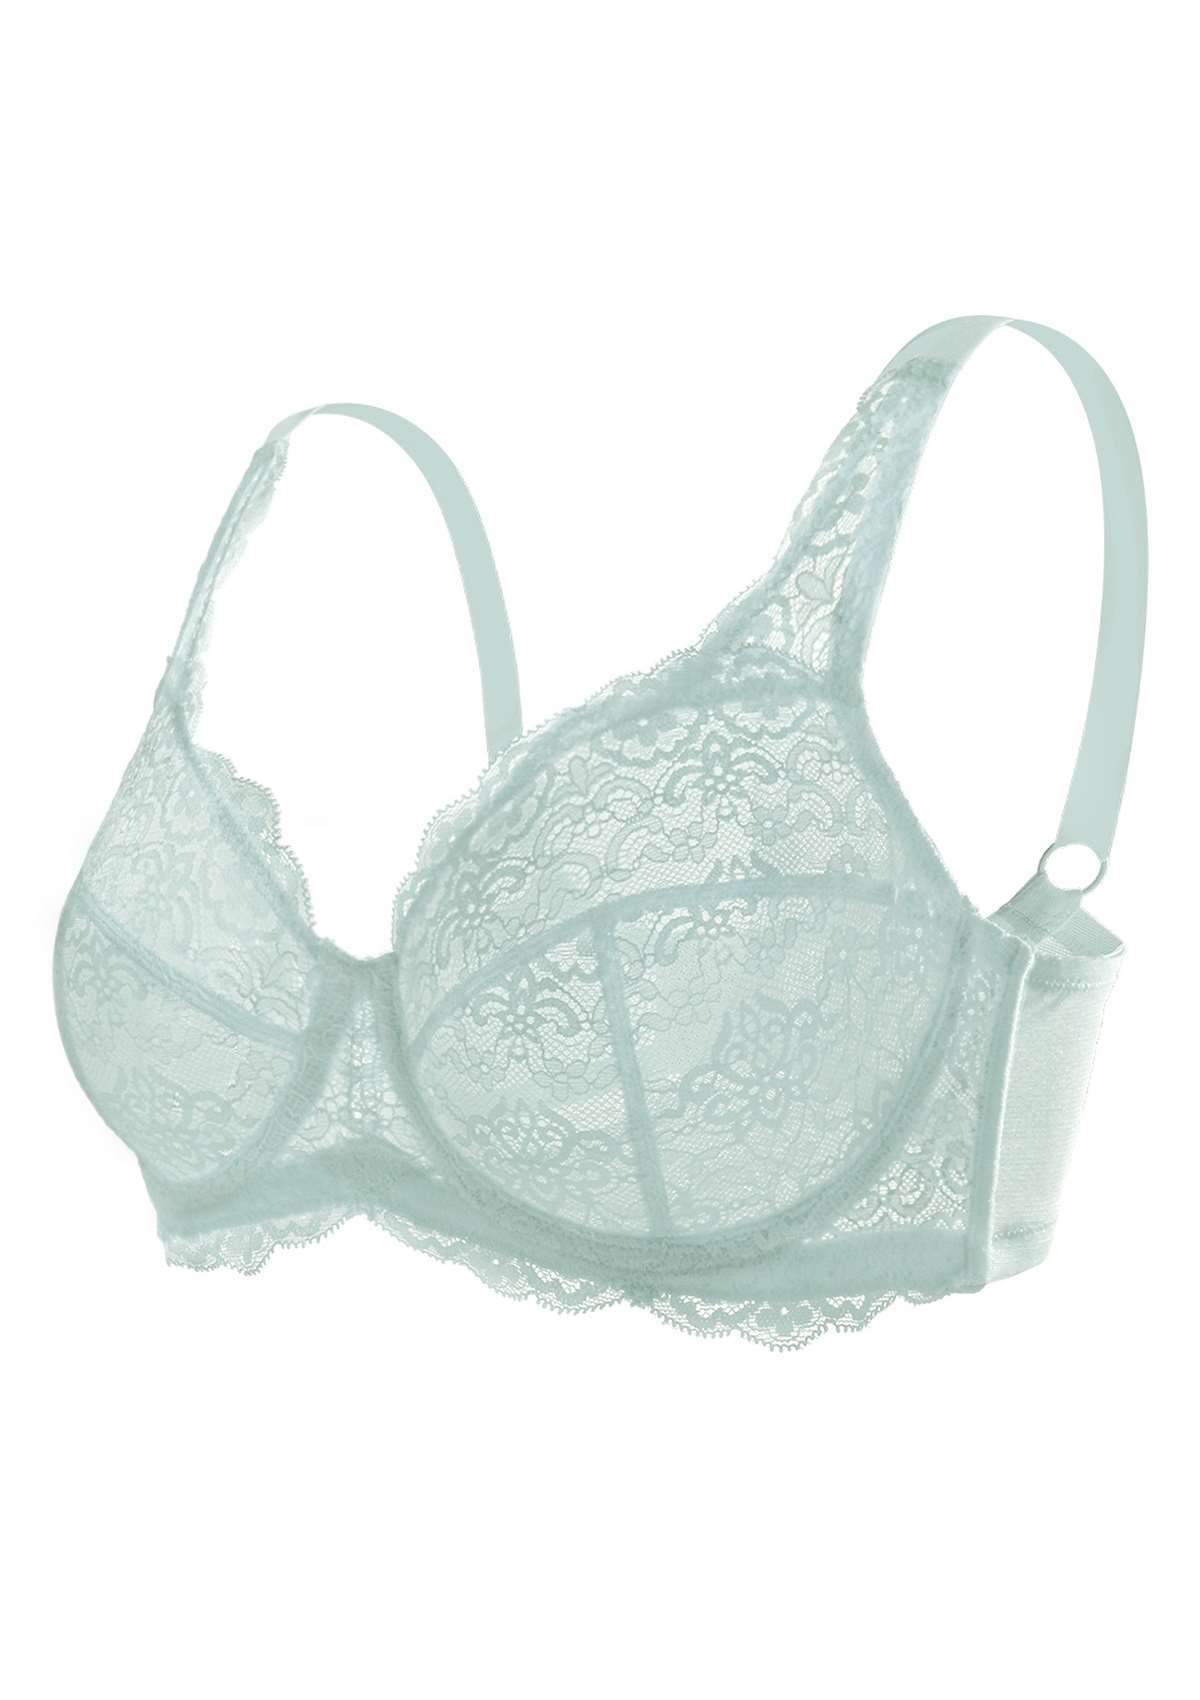 HSIA All-Over Floral Lace: Best Bra For Elderly With Sagging Breasts - Crystal Blue / 38 / DD/E